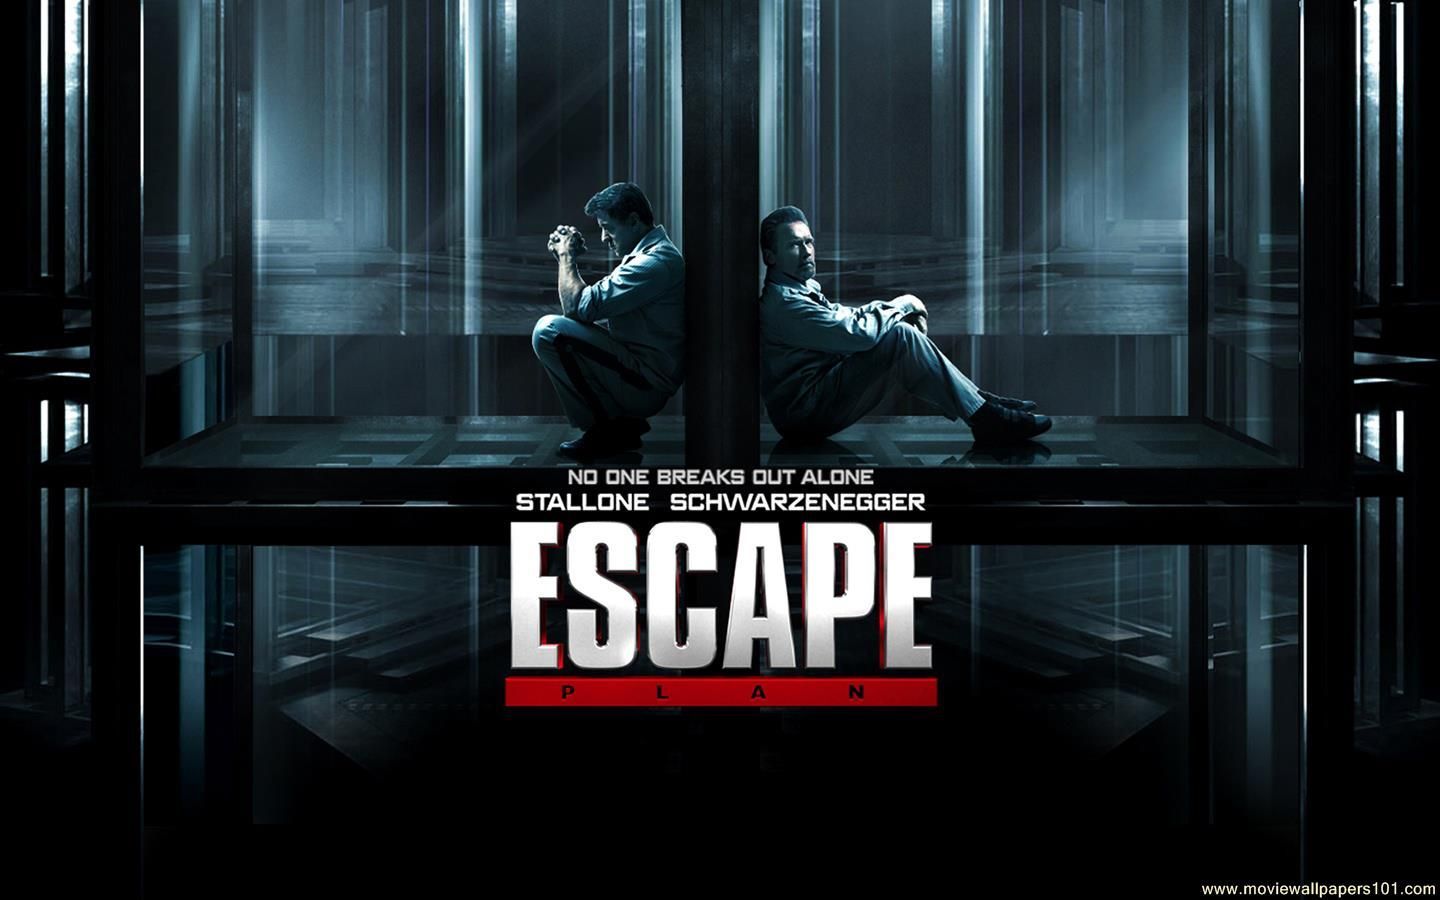 Download Escape Plan (2013) (Multi Audio) Blu-Ray Movie In 480p [350 MB] | 720p [1 GB] - Techoffical.com